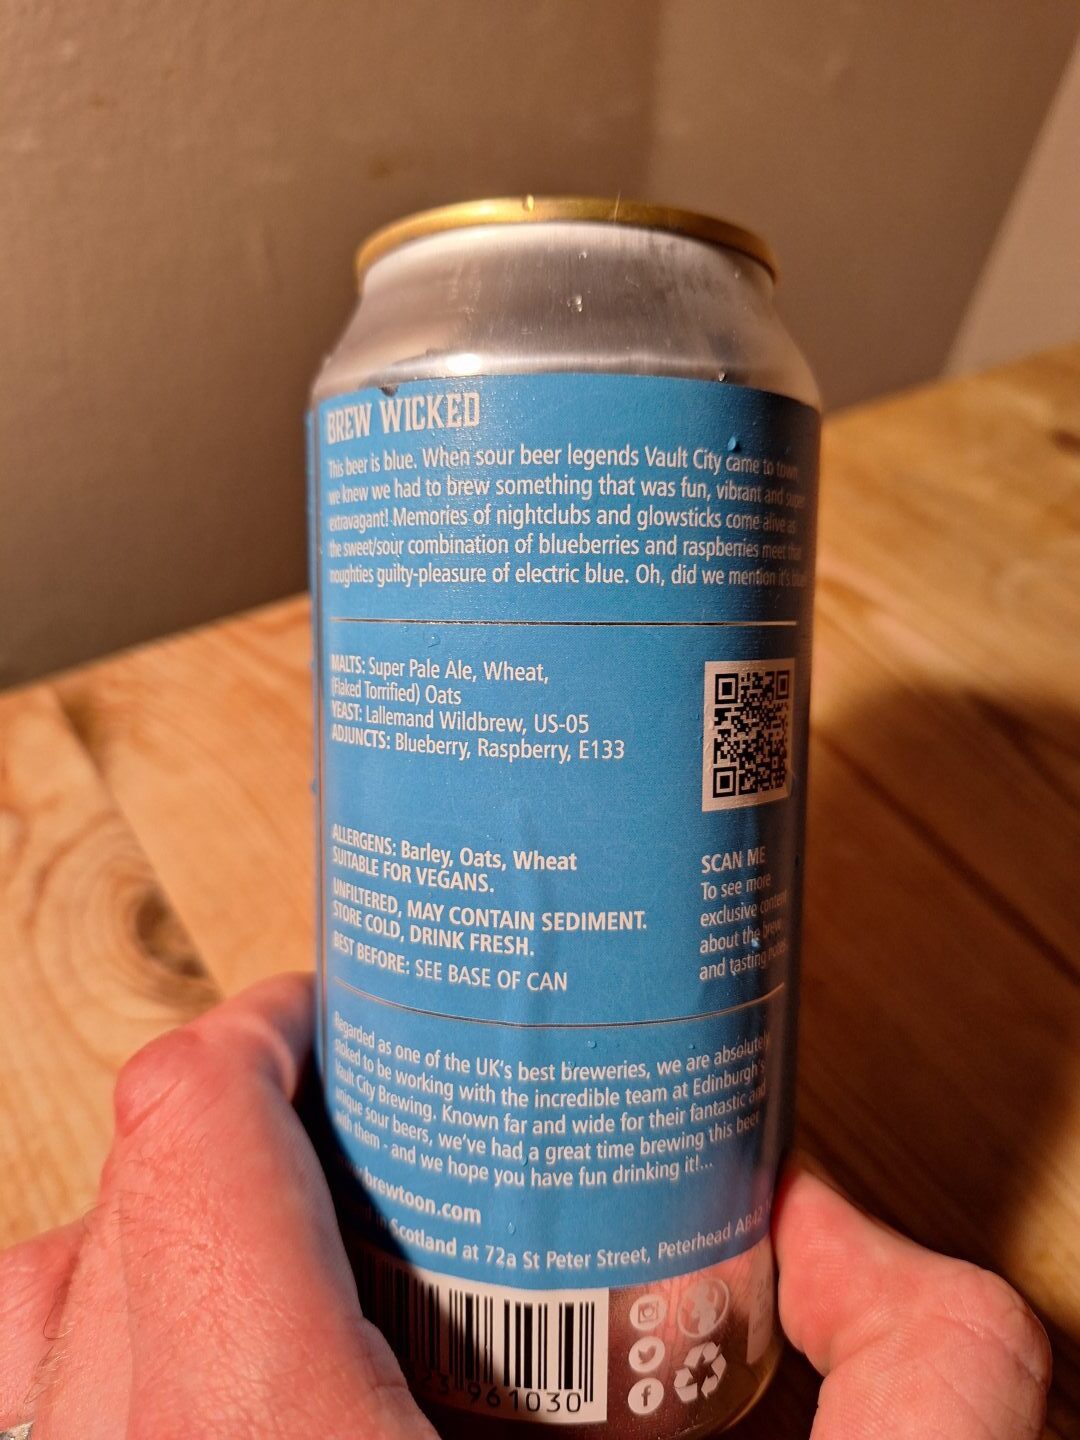 The back of the Brew Wicked can. 